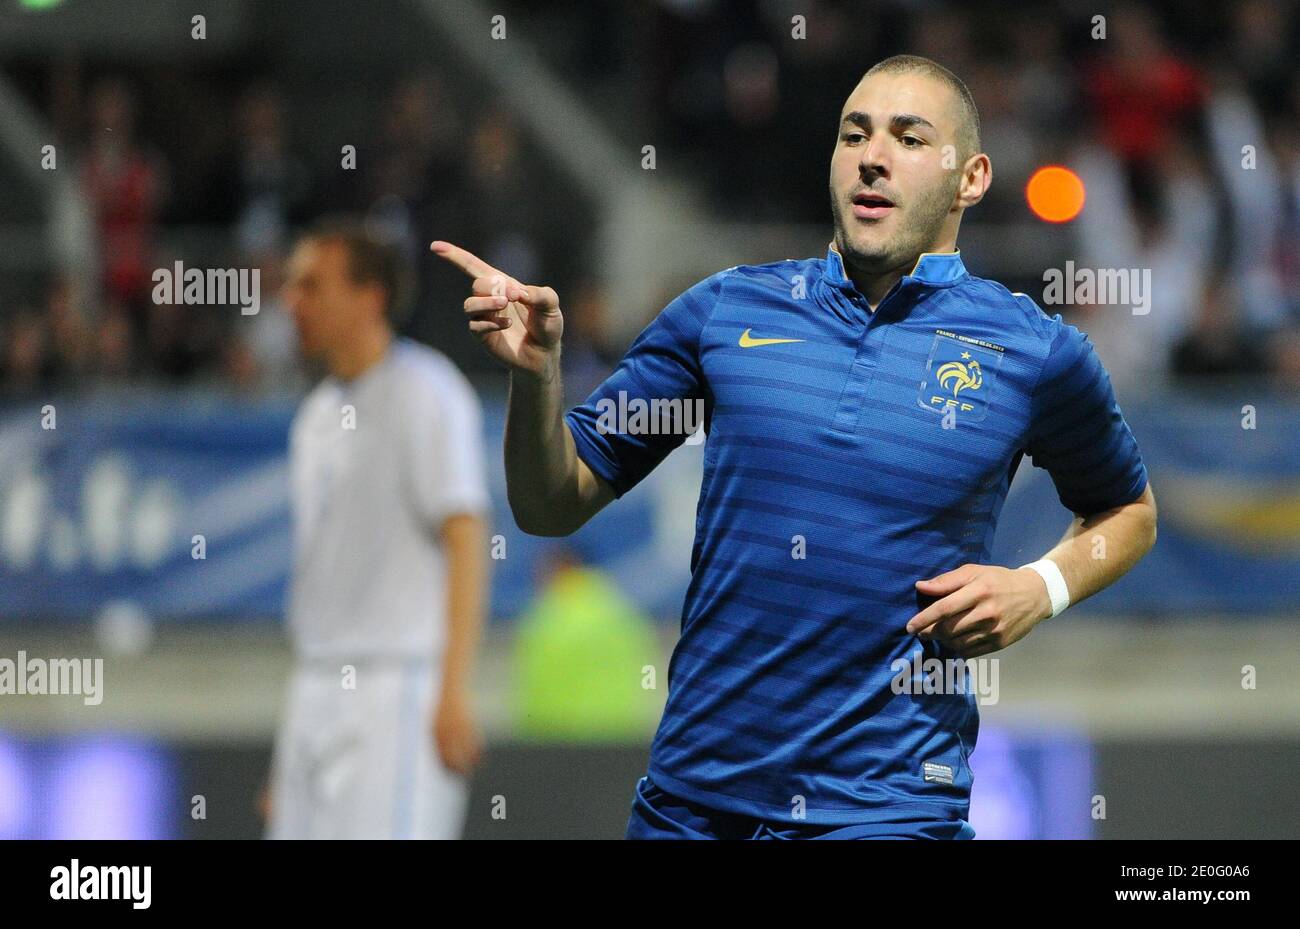 France's Karim Benzema during an International Friendly soccer match, France Vs Estonia at MMArena stadium in Le Mans, France, on June 5, 2012. France won 4-0. Photo by ABACAPRESS.COM Stock Photo